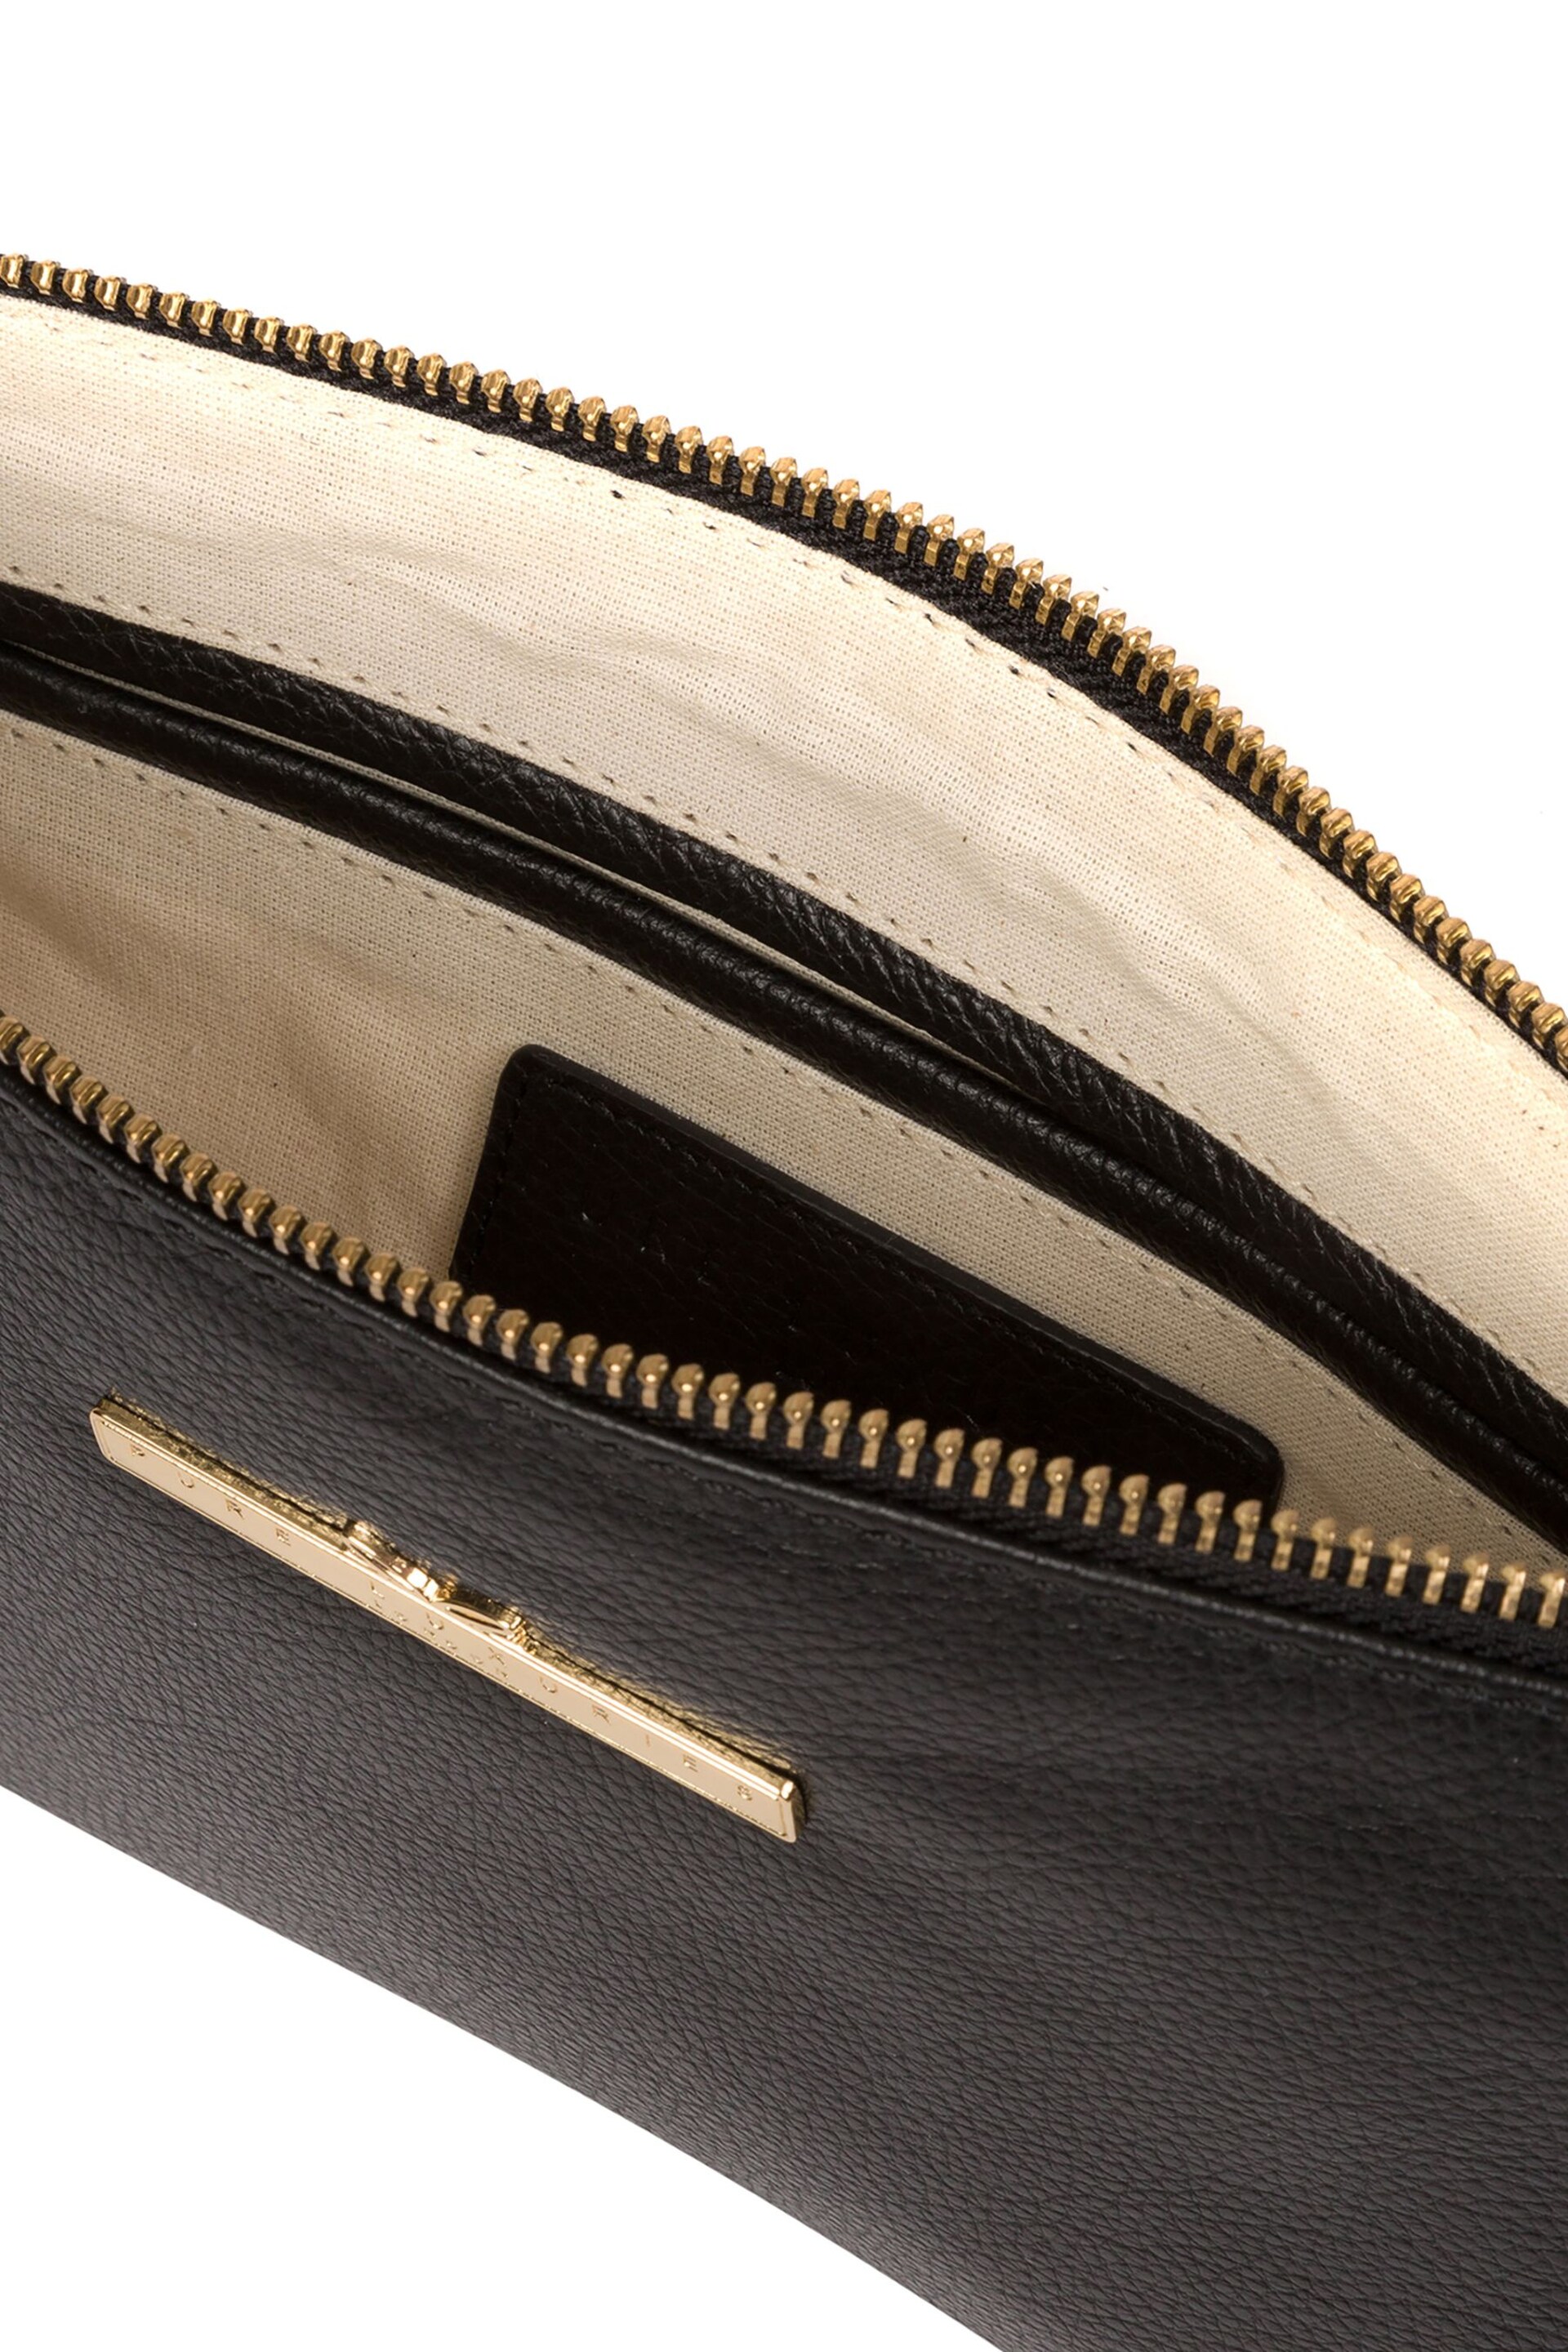 Pure Luxuries London Arlesey Leather Clutch Bag - Image 3 of 4